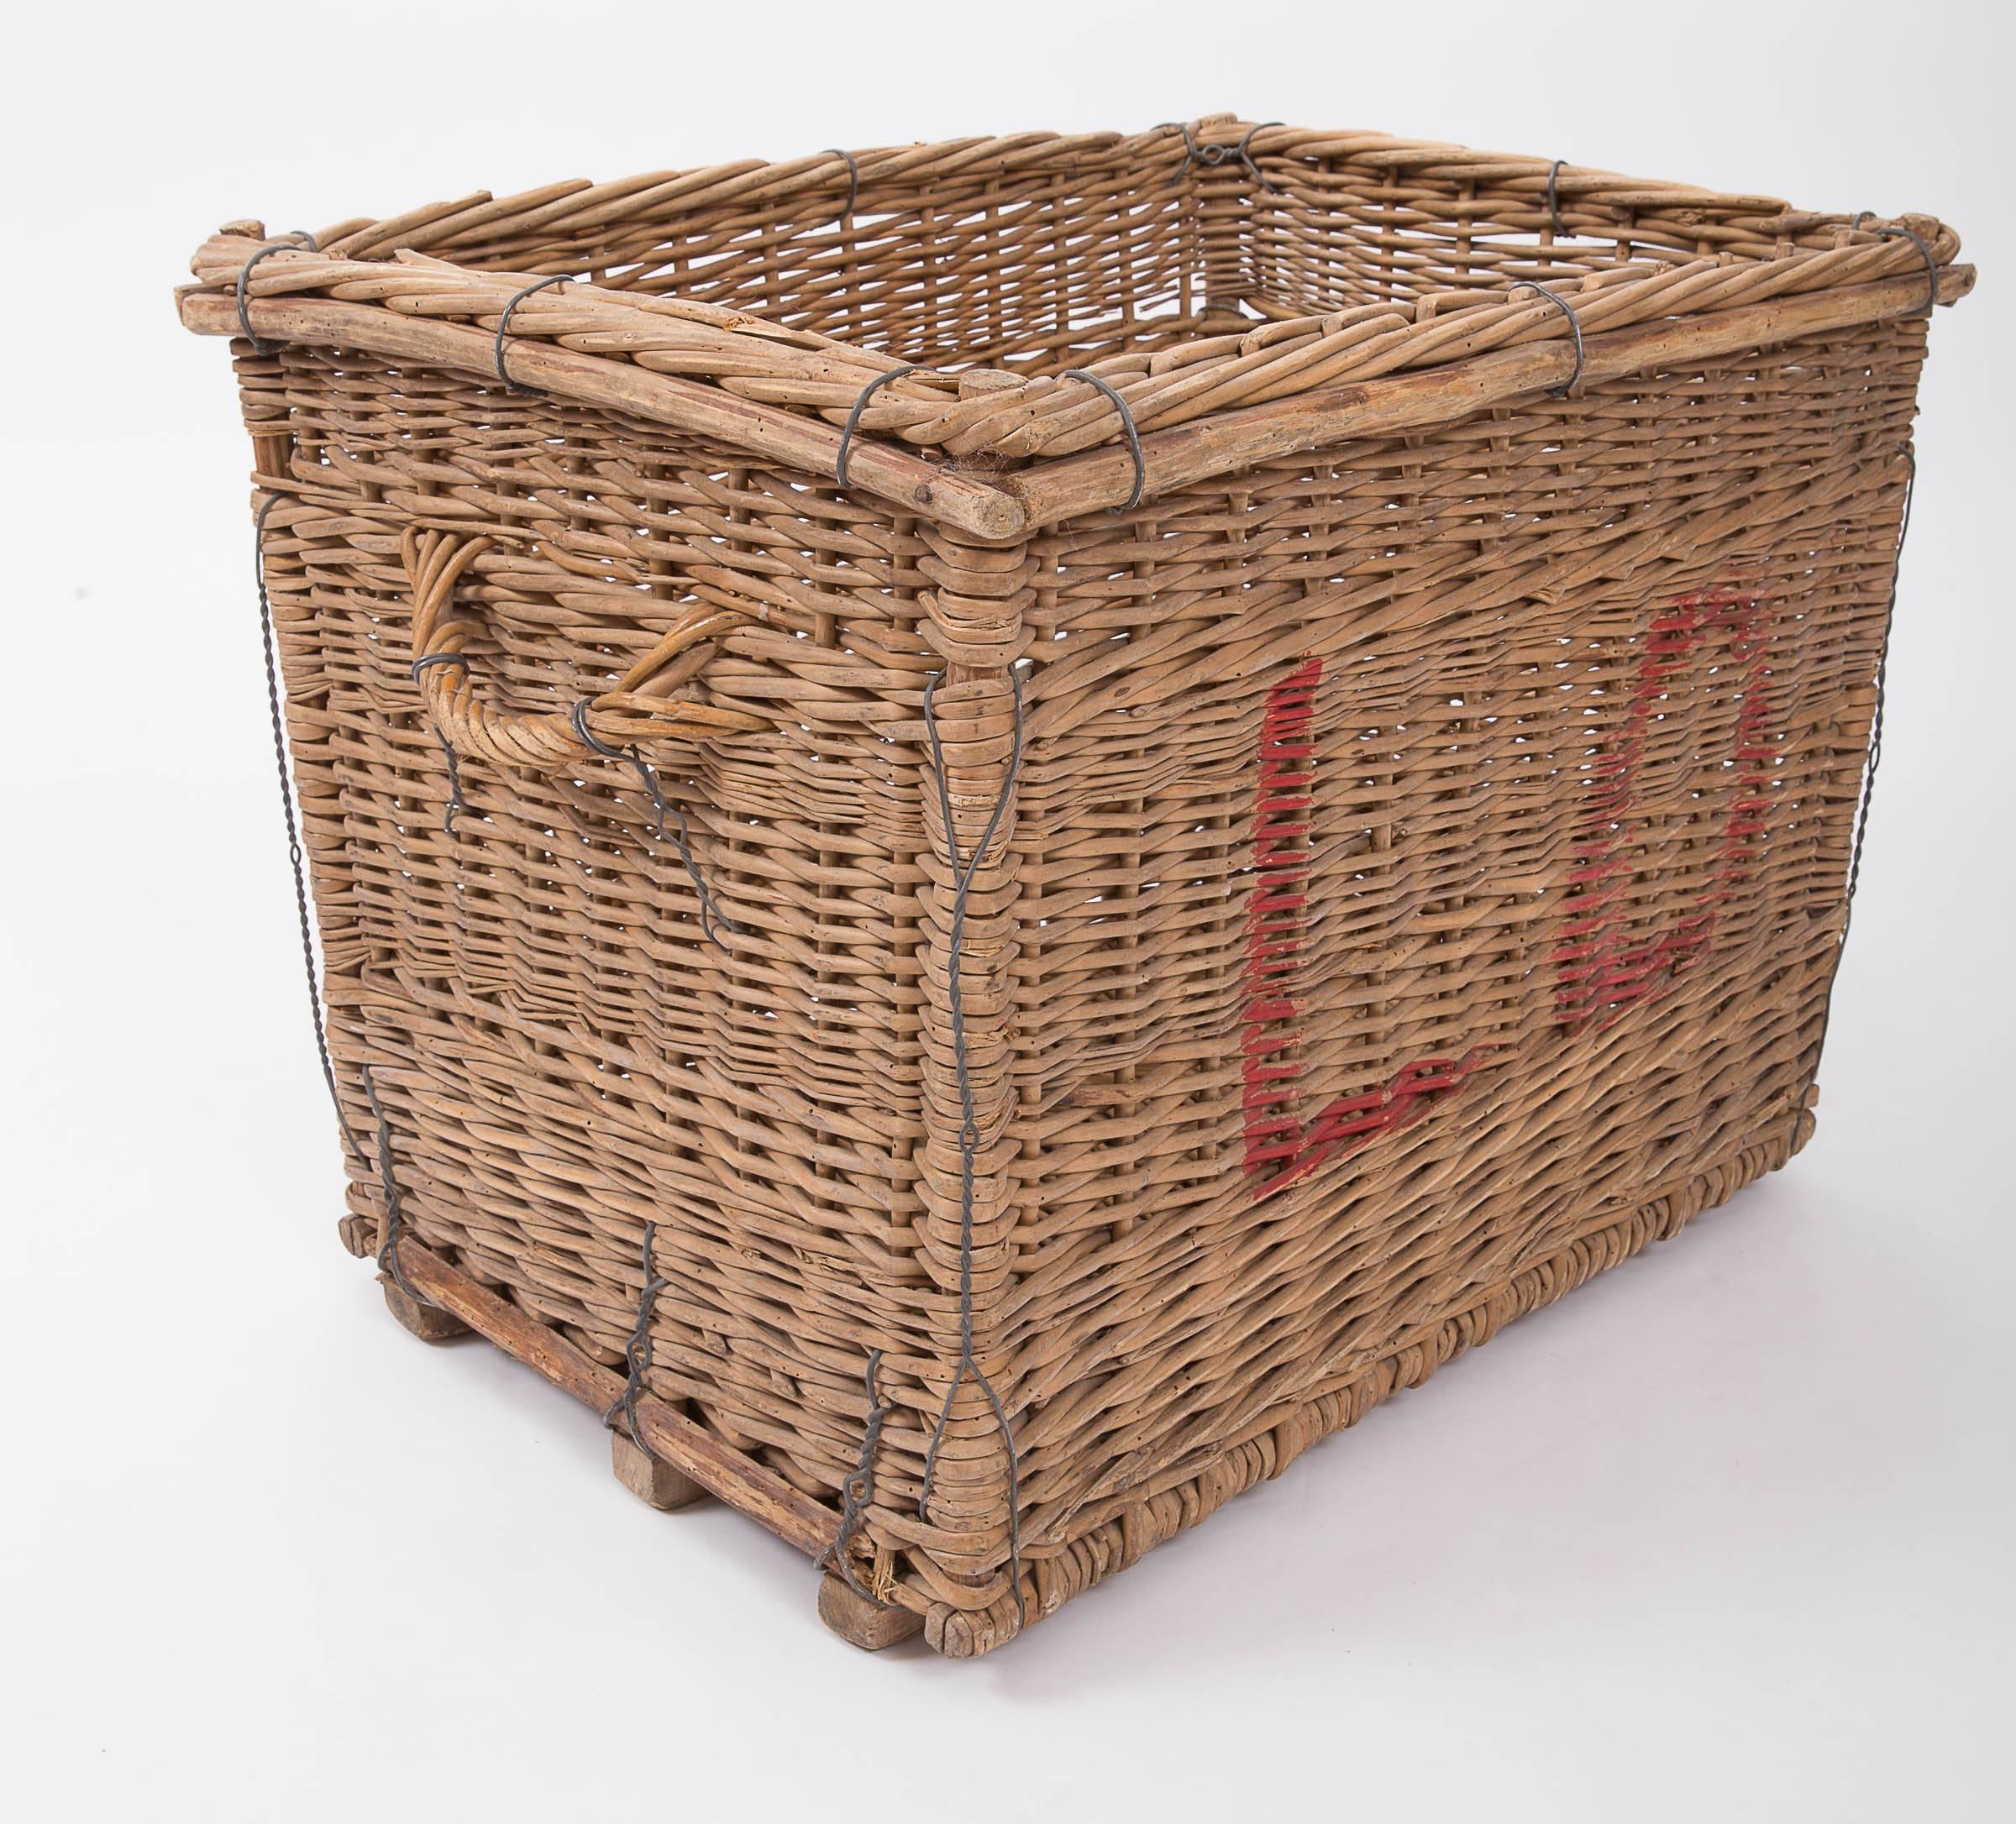 Wicker basket with wooden frame, originally used for carrying champagne bottles from the vineyard, sturdy enough to hold firewood.